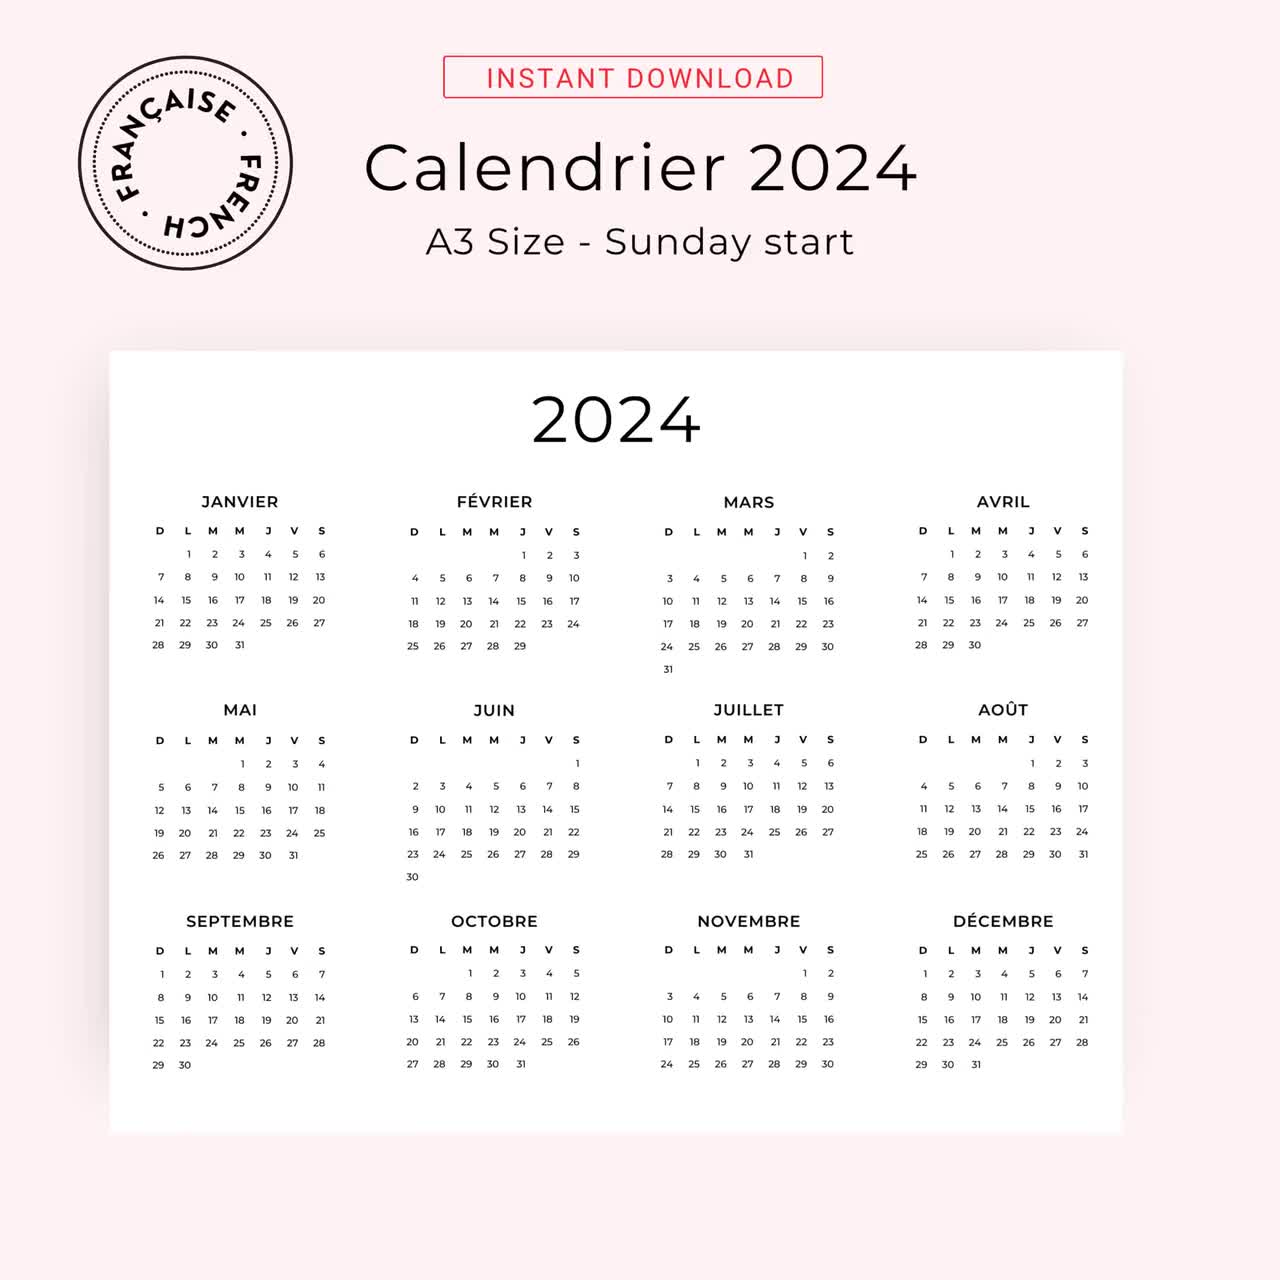 Calendrier 2024 Calendrier Français 2024 Planificateur Imprimable 2024  French Calendar 2024 French Planner PRINTABLE Wall Calendar French 